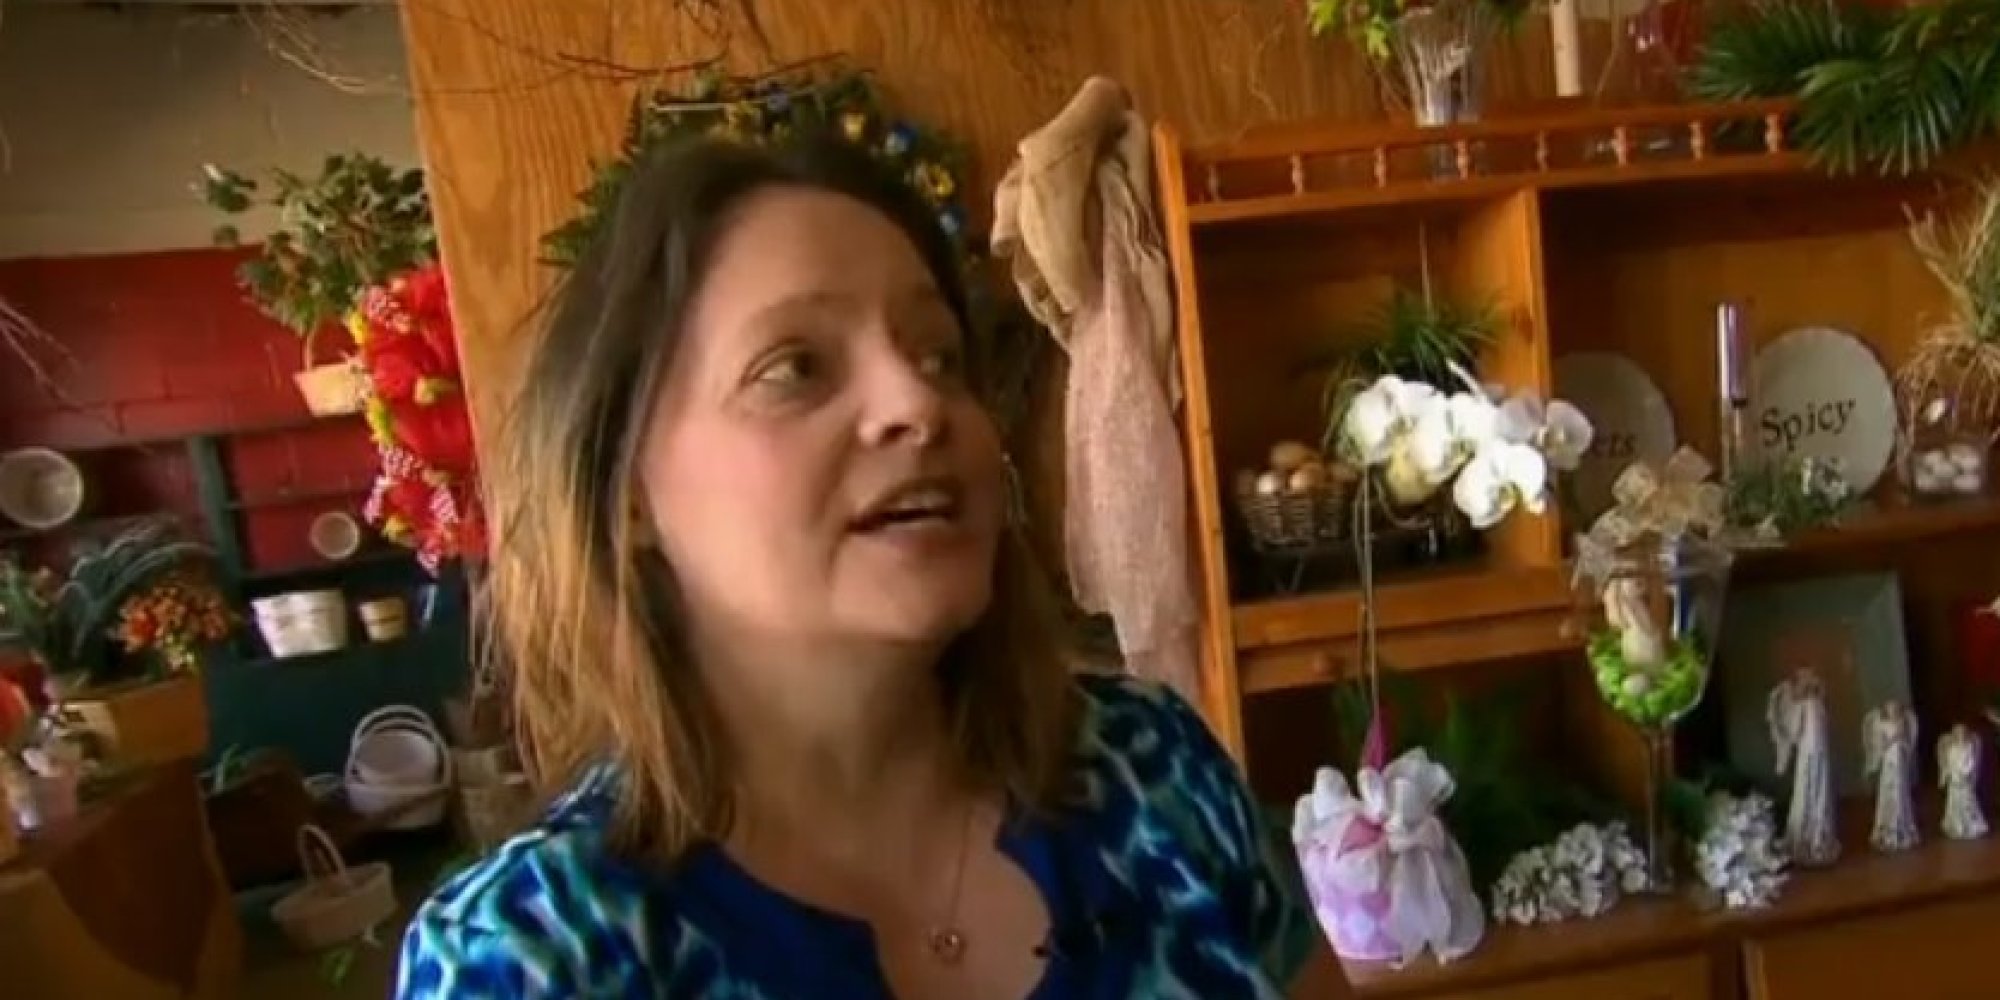 Florist Says She'd Serve An Adulterer But Not A Same-Sex Couple, Because Being Gay Is 'A Different Kind Of Sin'